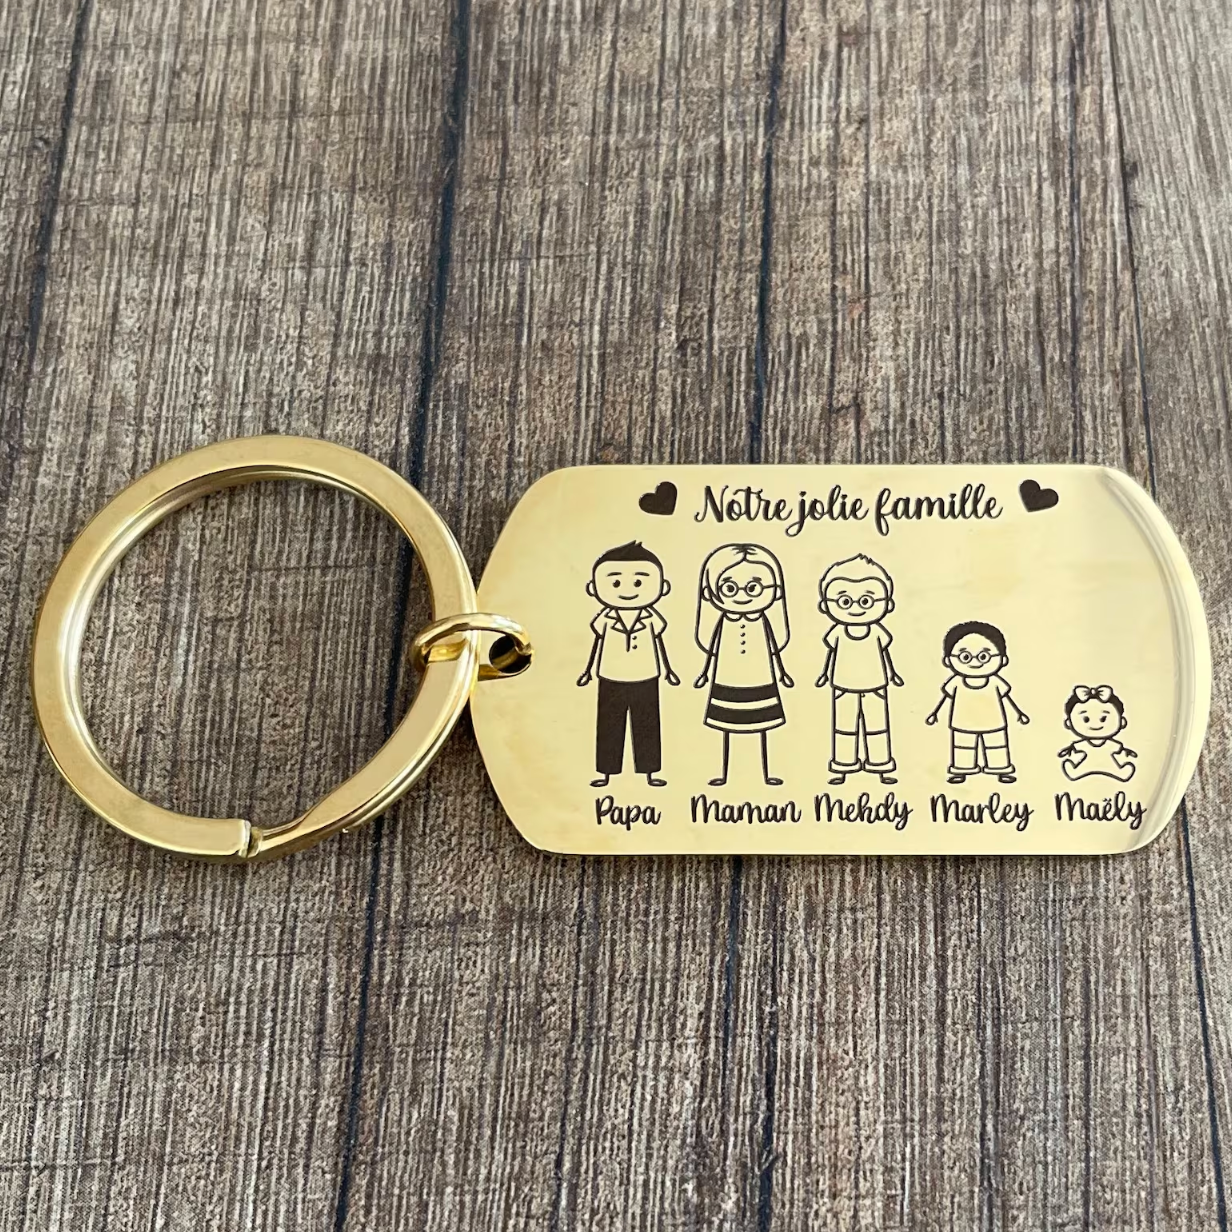 Personalized engraved family key ring in stainless steel metal